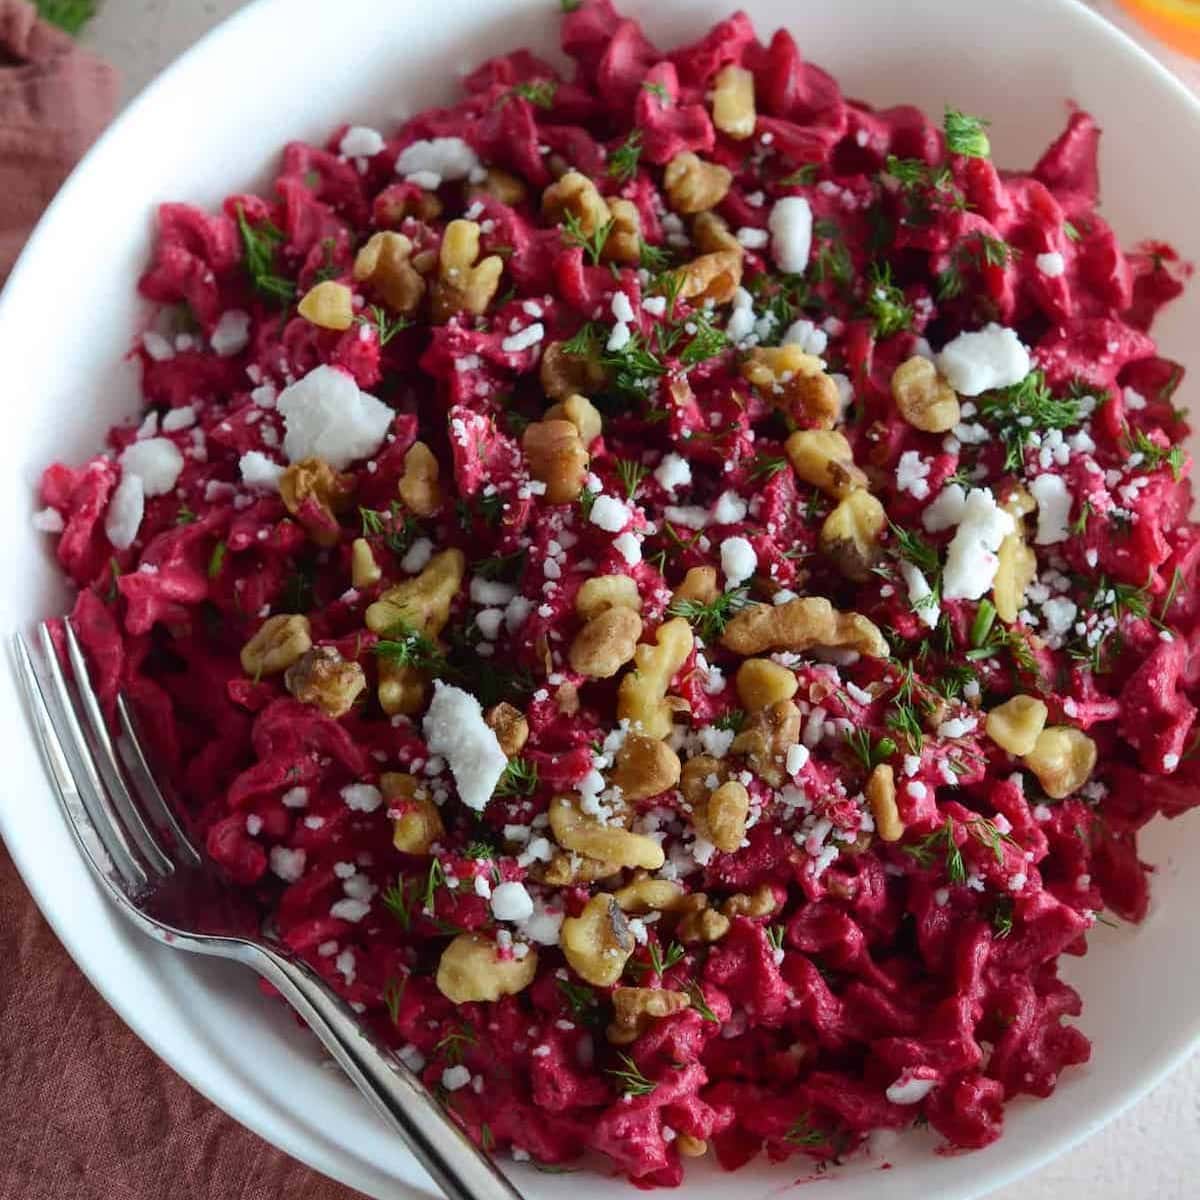 22. Creamy Beet Pasta Sauce with Feta and Walnuts